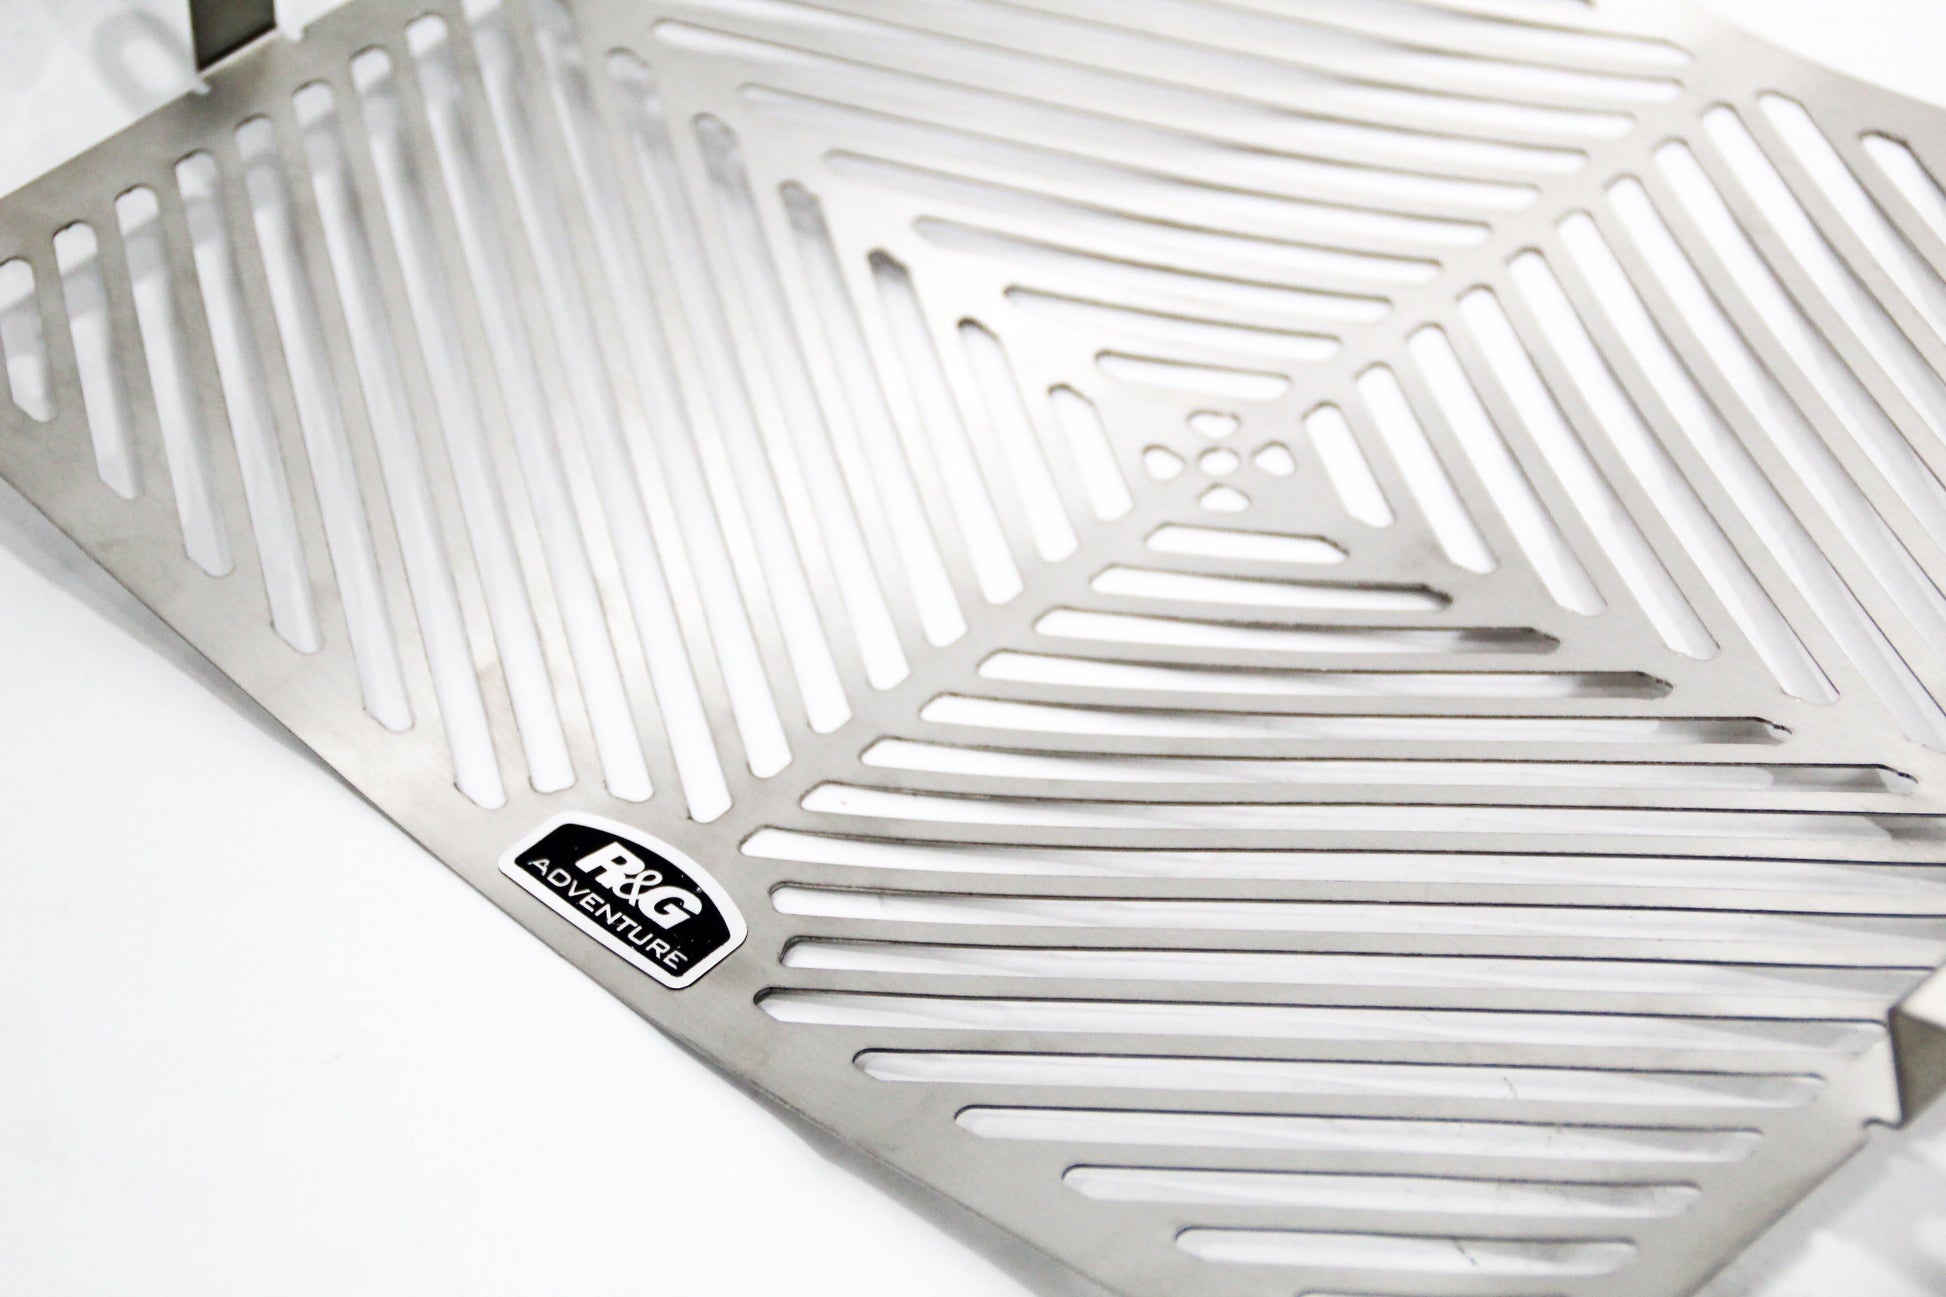 R&G Radiator Guard (Stainless Steel) fits for KTM 1050 / 1190 Adventure ('13-) / 1290 Super Adventure ('15-) - Durian Bikers